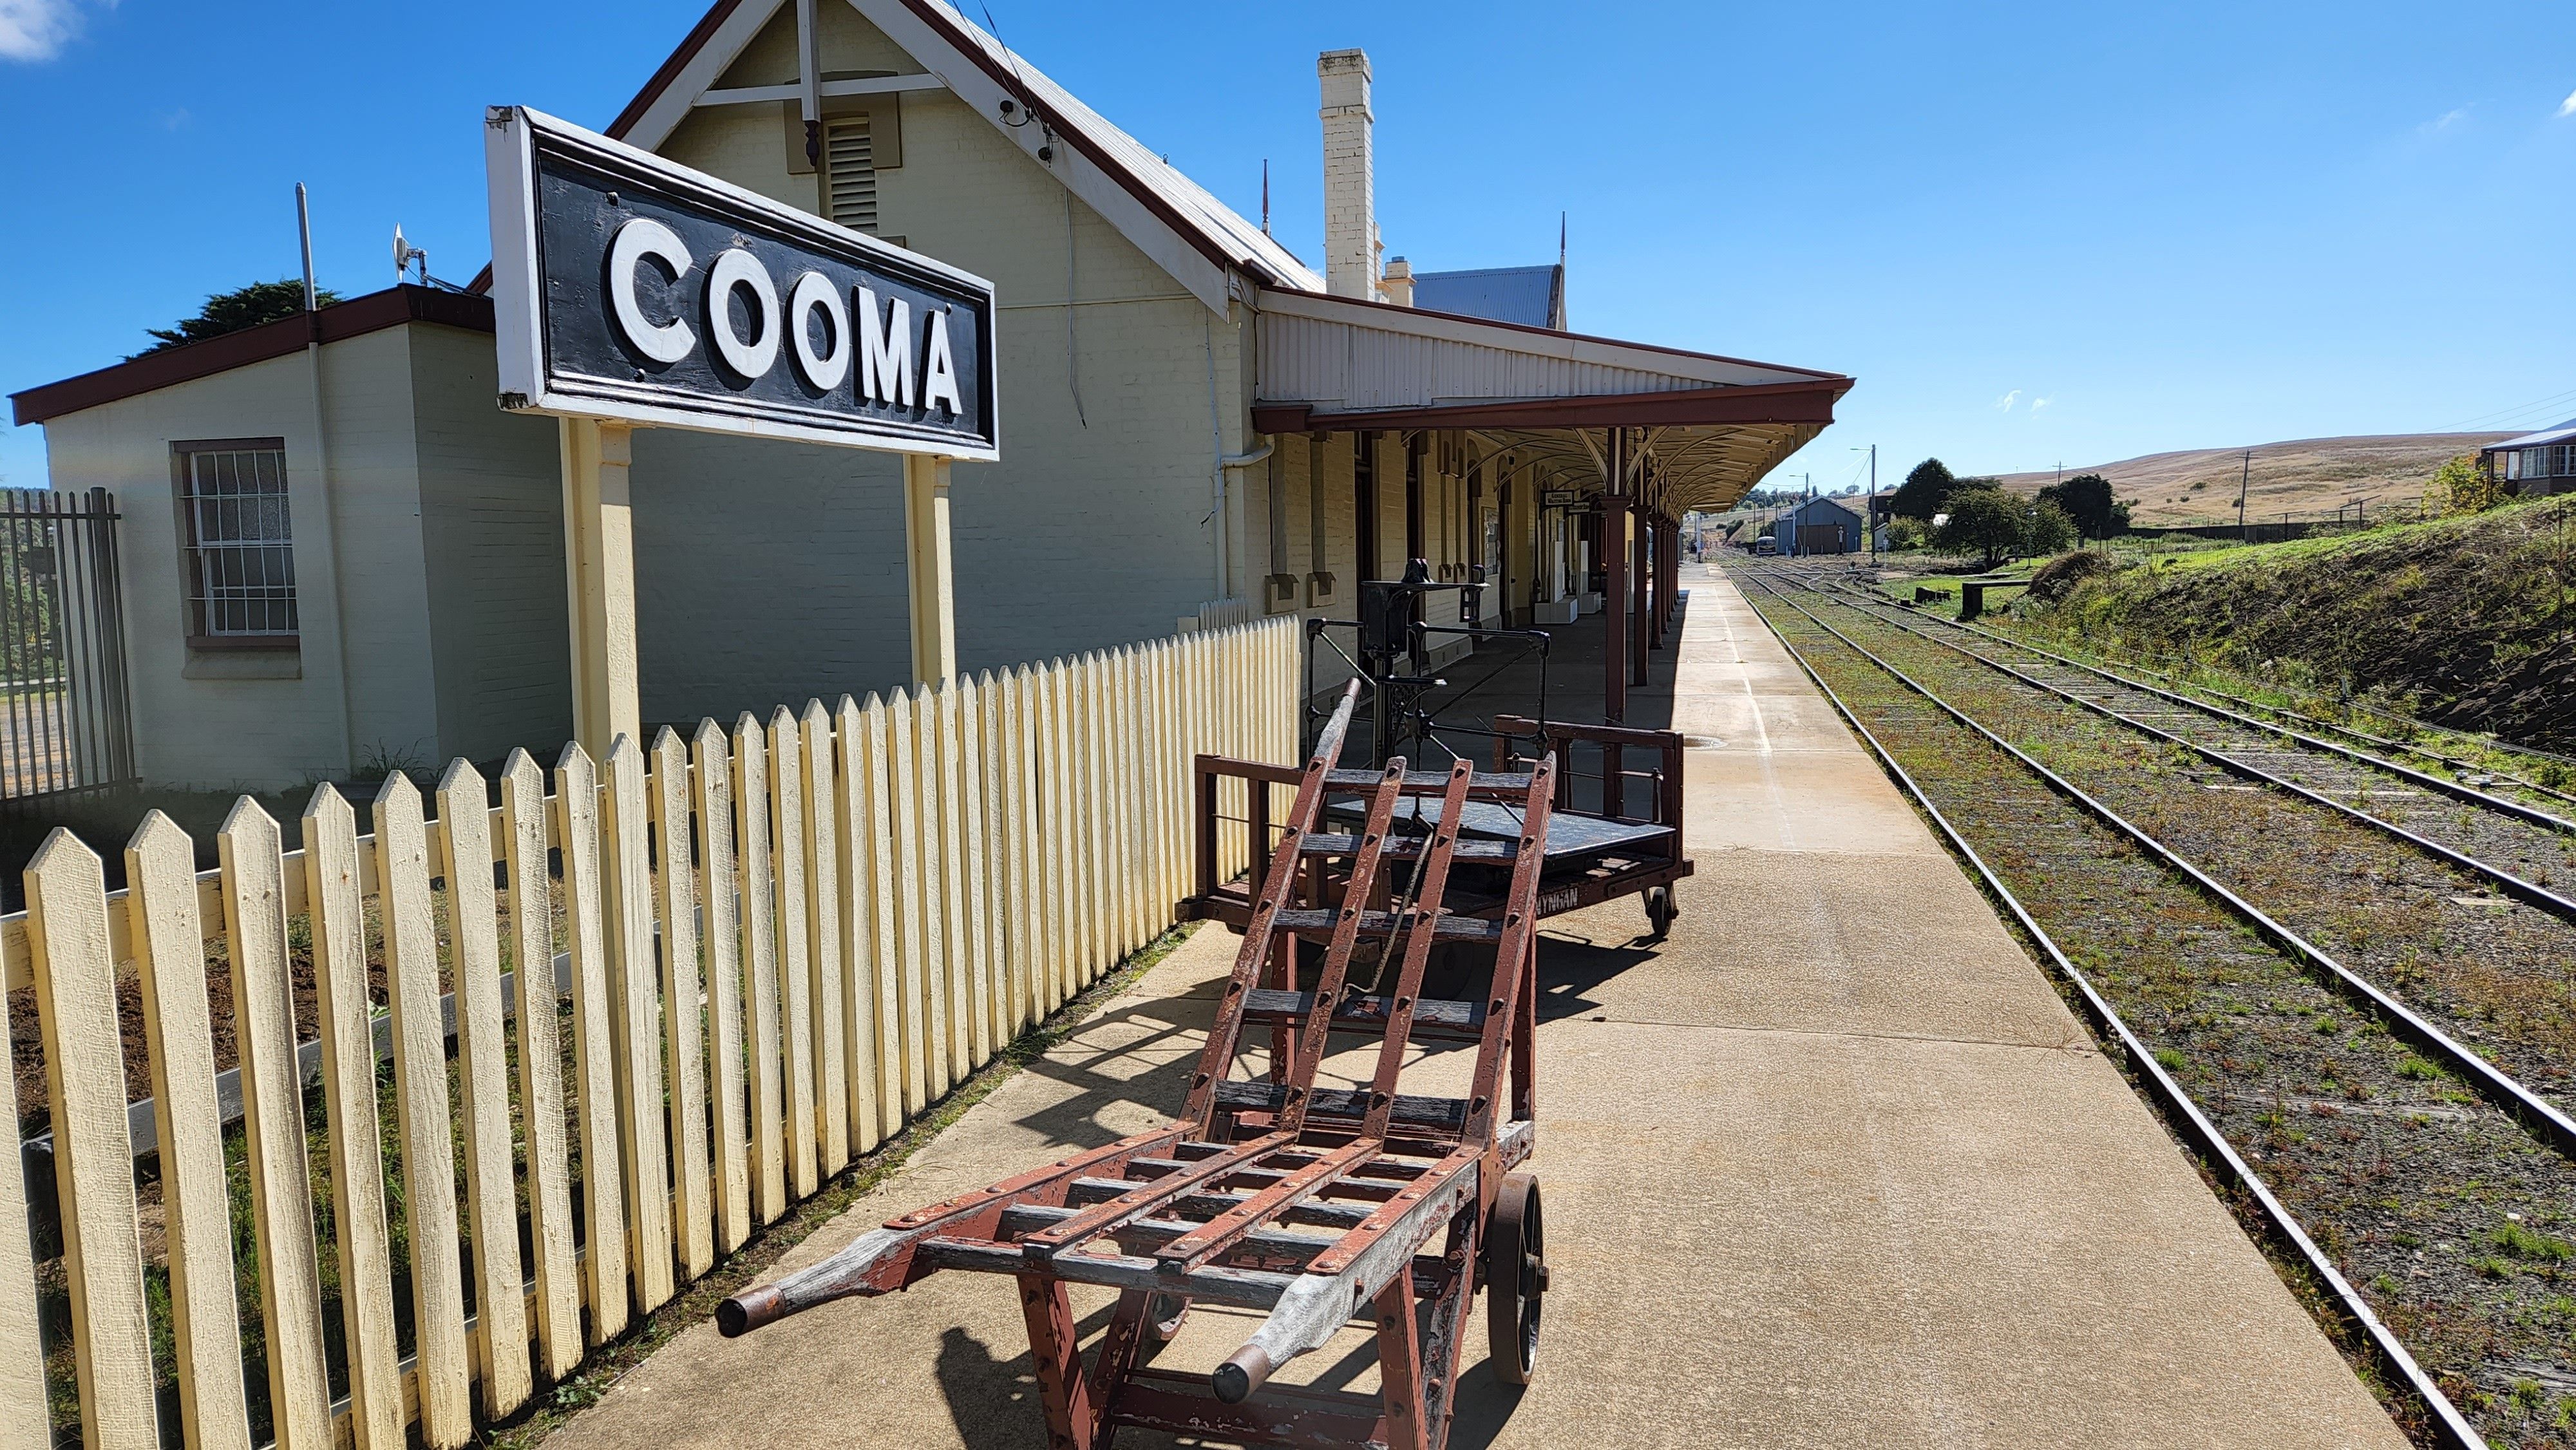 Cooma railway renovations moving full steam ahead thanks to heritage funds